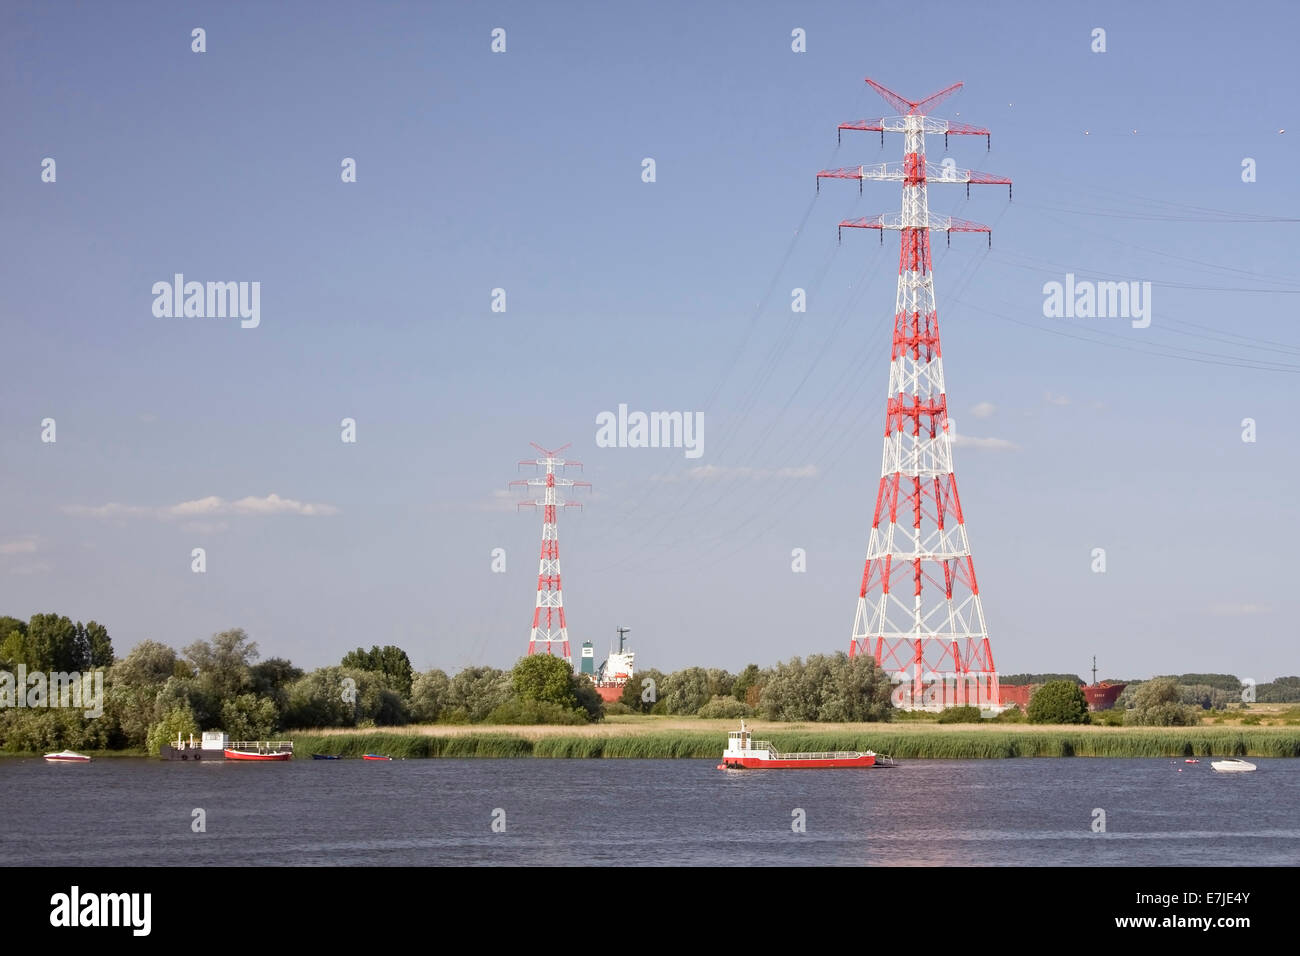 Germany, Elbe, energy supply, power lines, energy, masts, Lower Saxony, Stade, power supply, electricity supply, Stock Photo